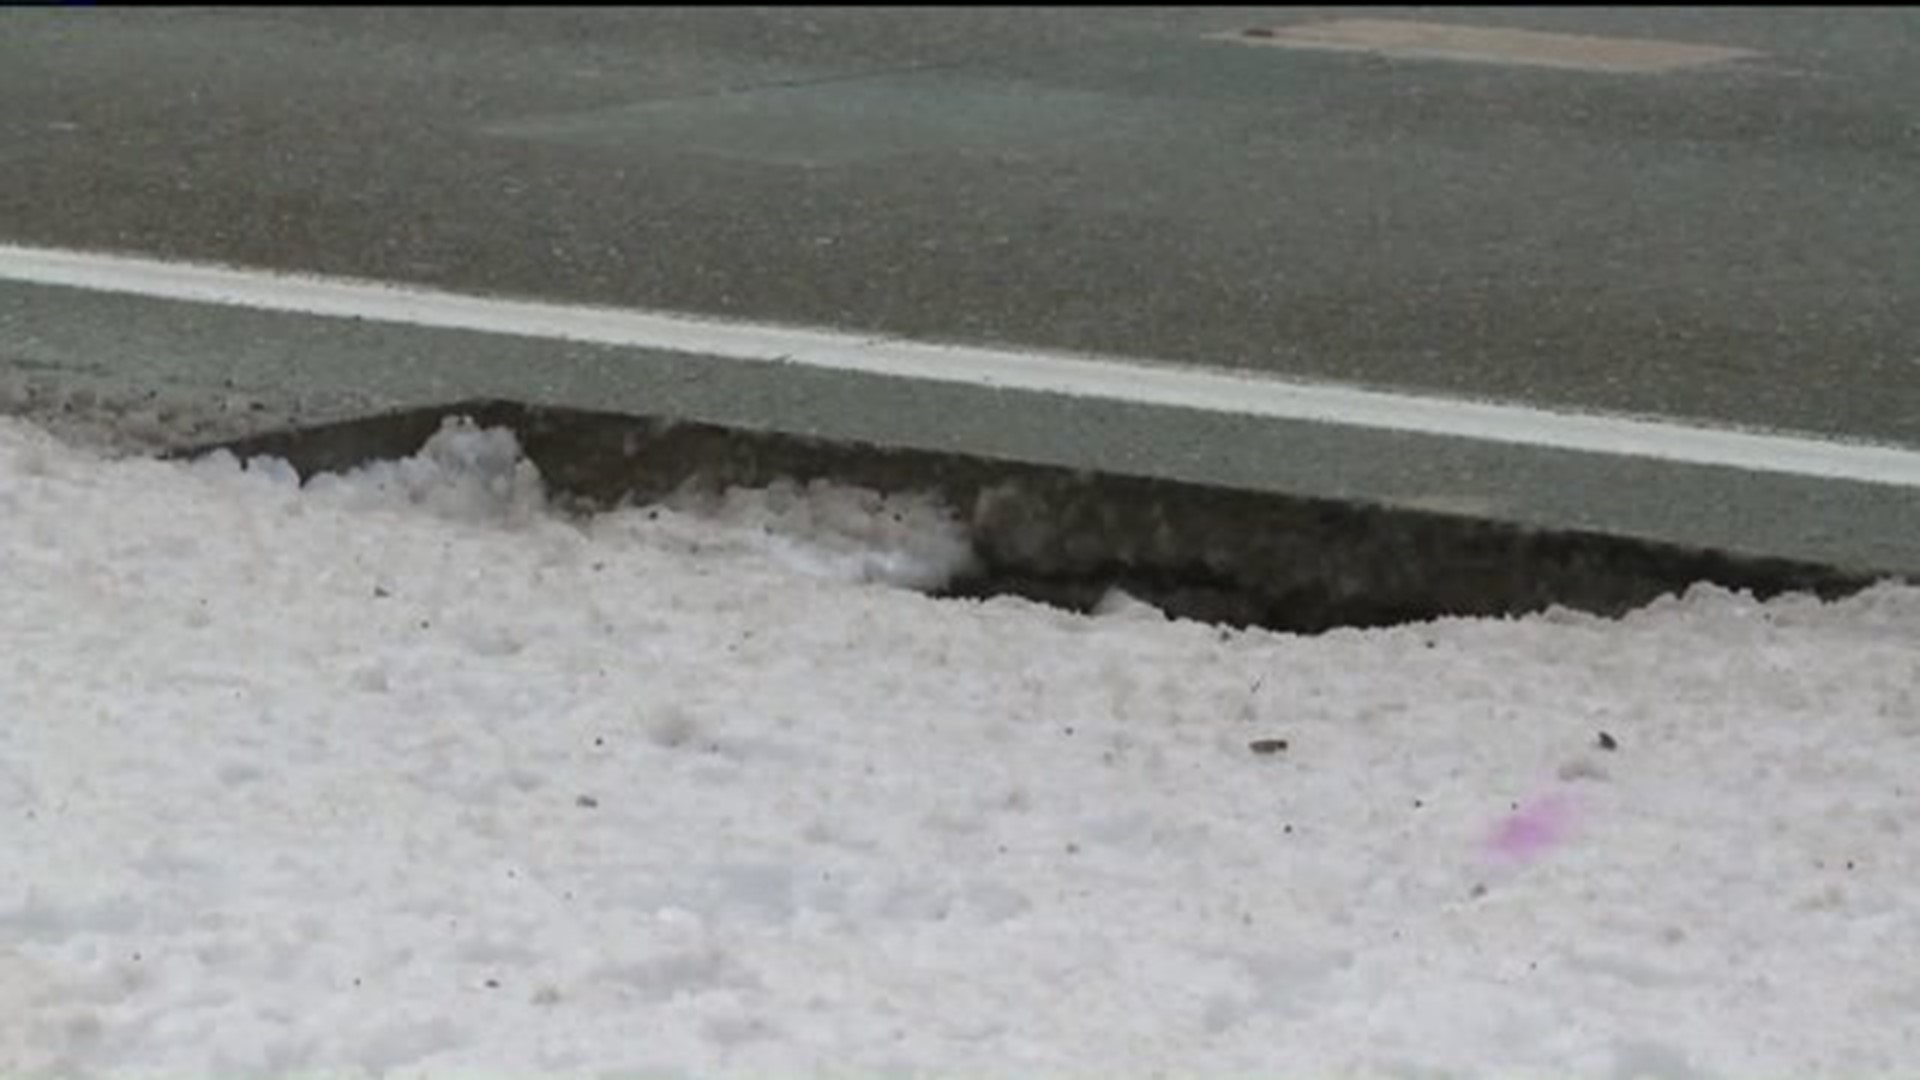 CREWS TO FIX HOLE ON INTERSTATE 81